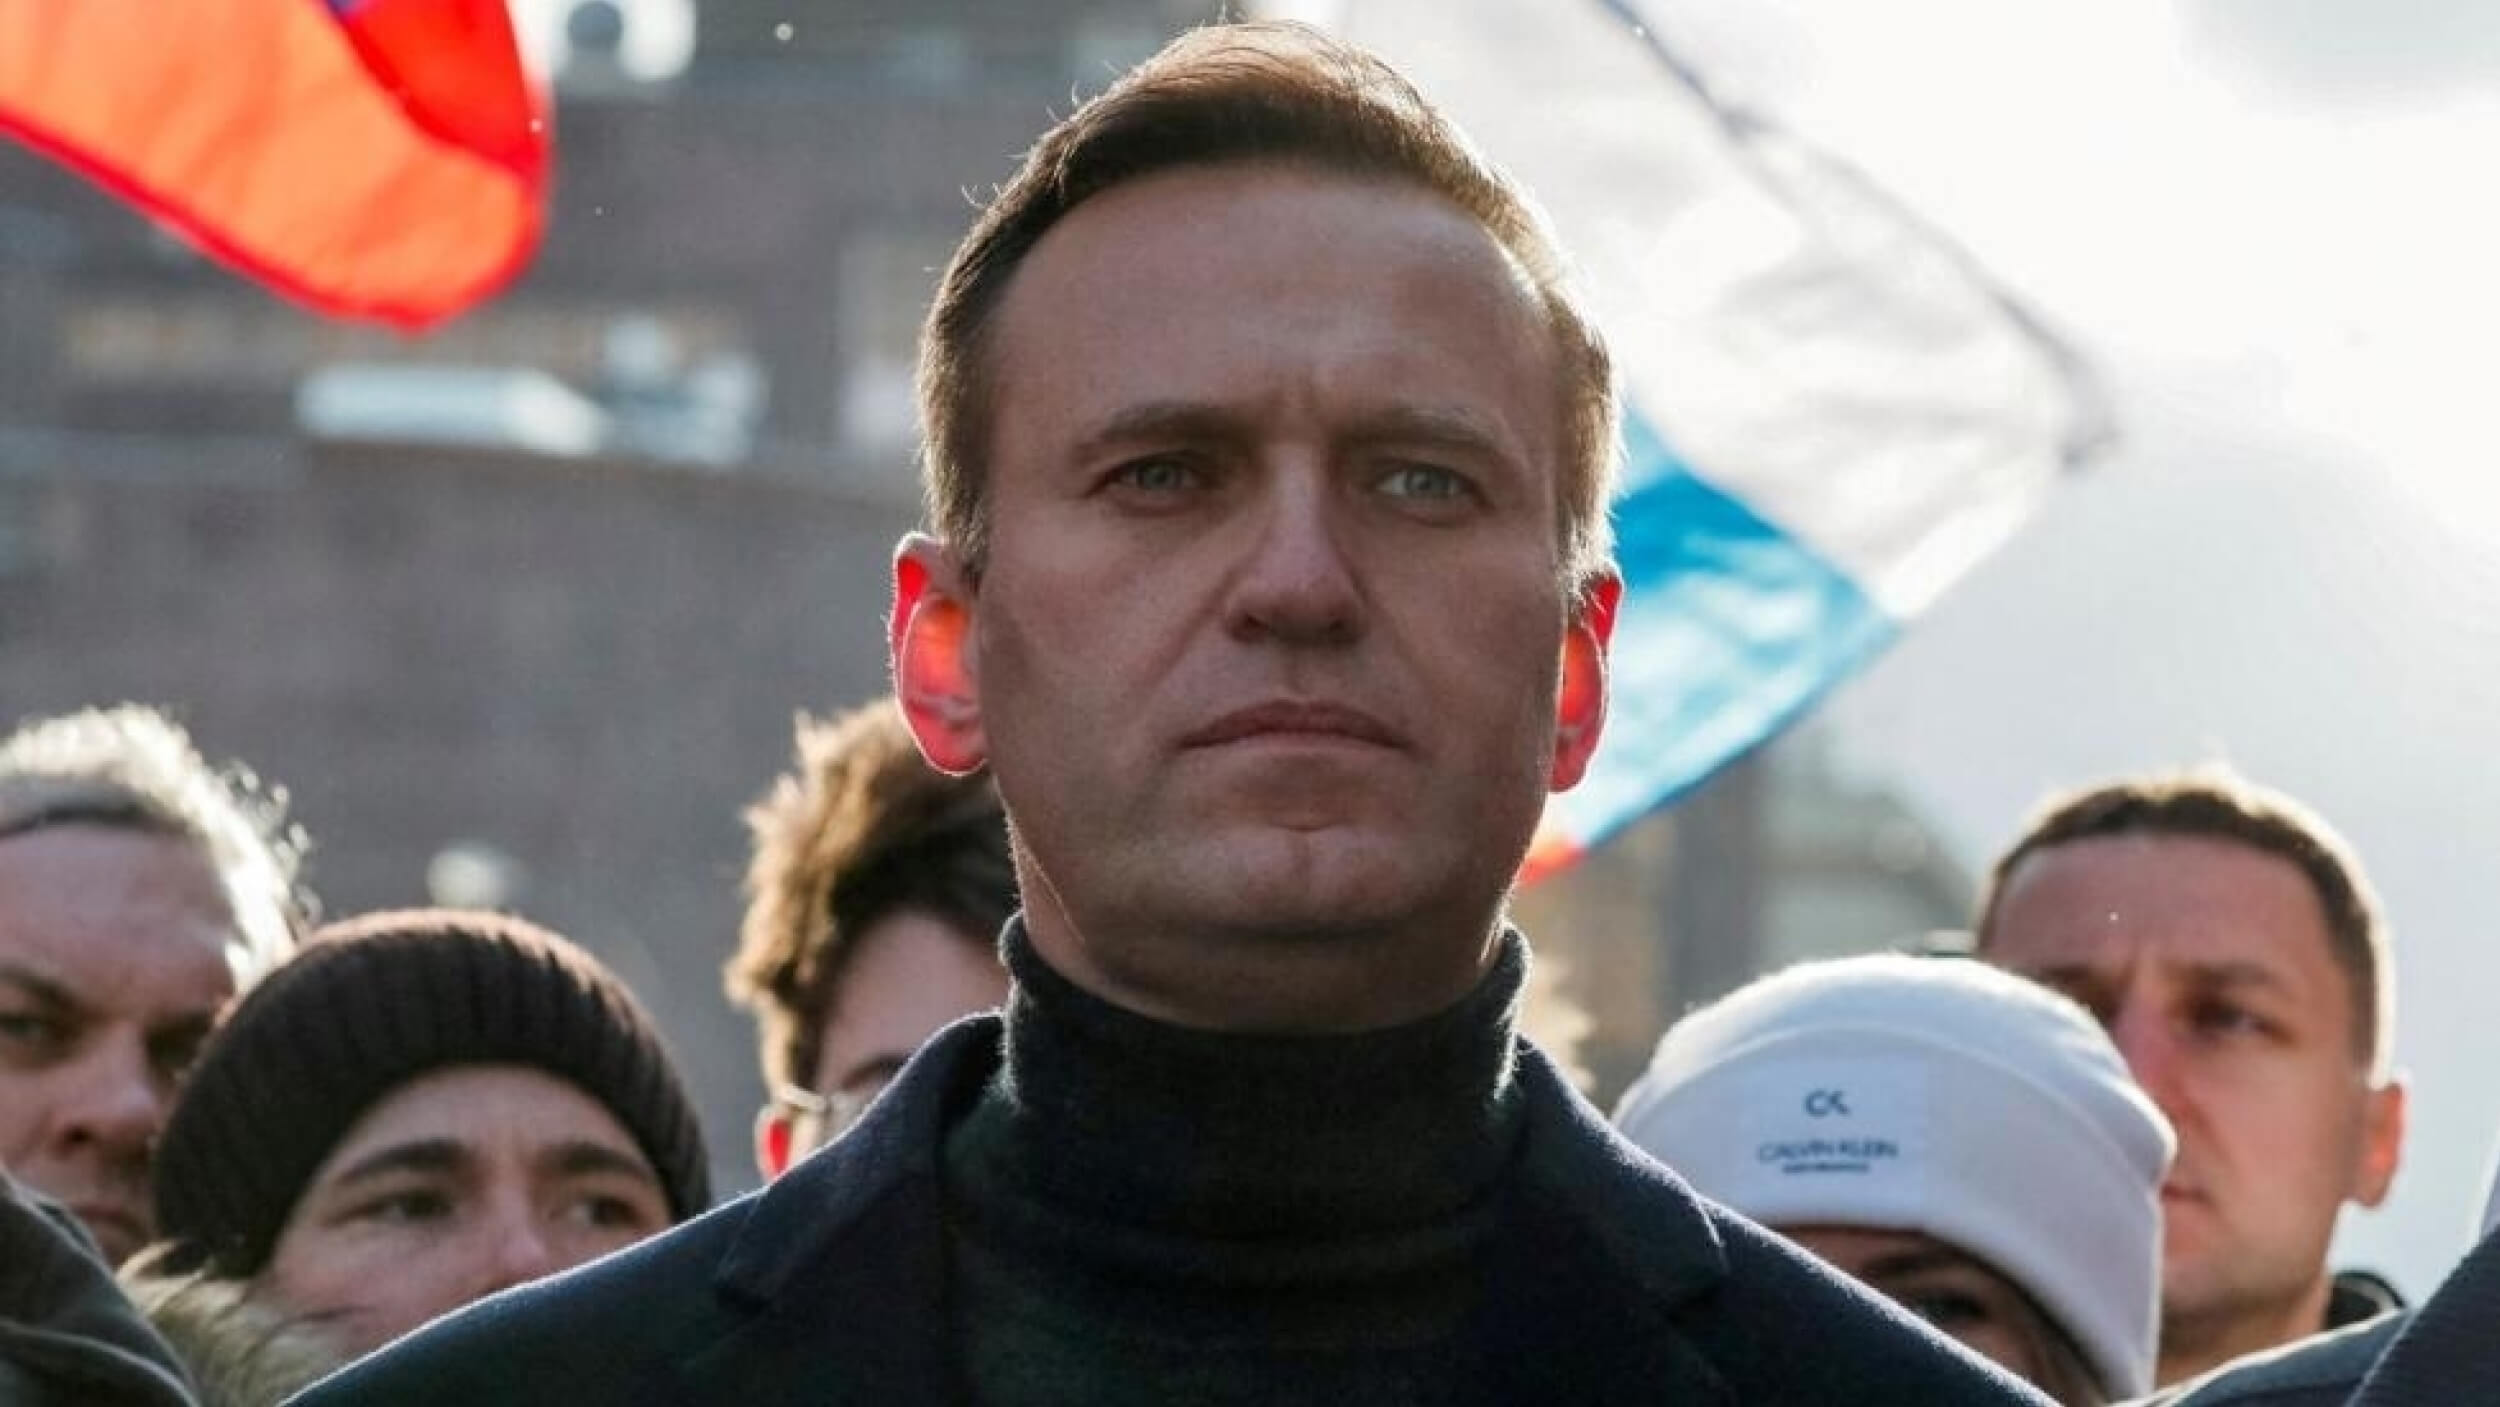 HRF condemns the murder of Russian dissident Alexei Navalny